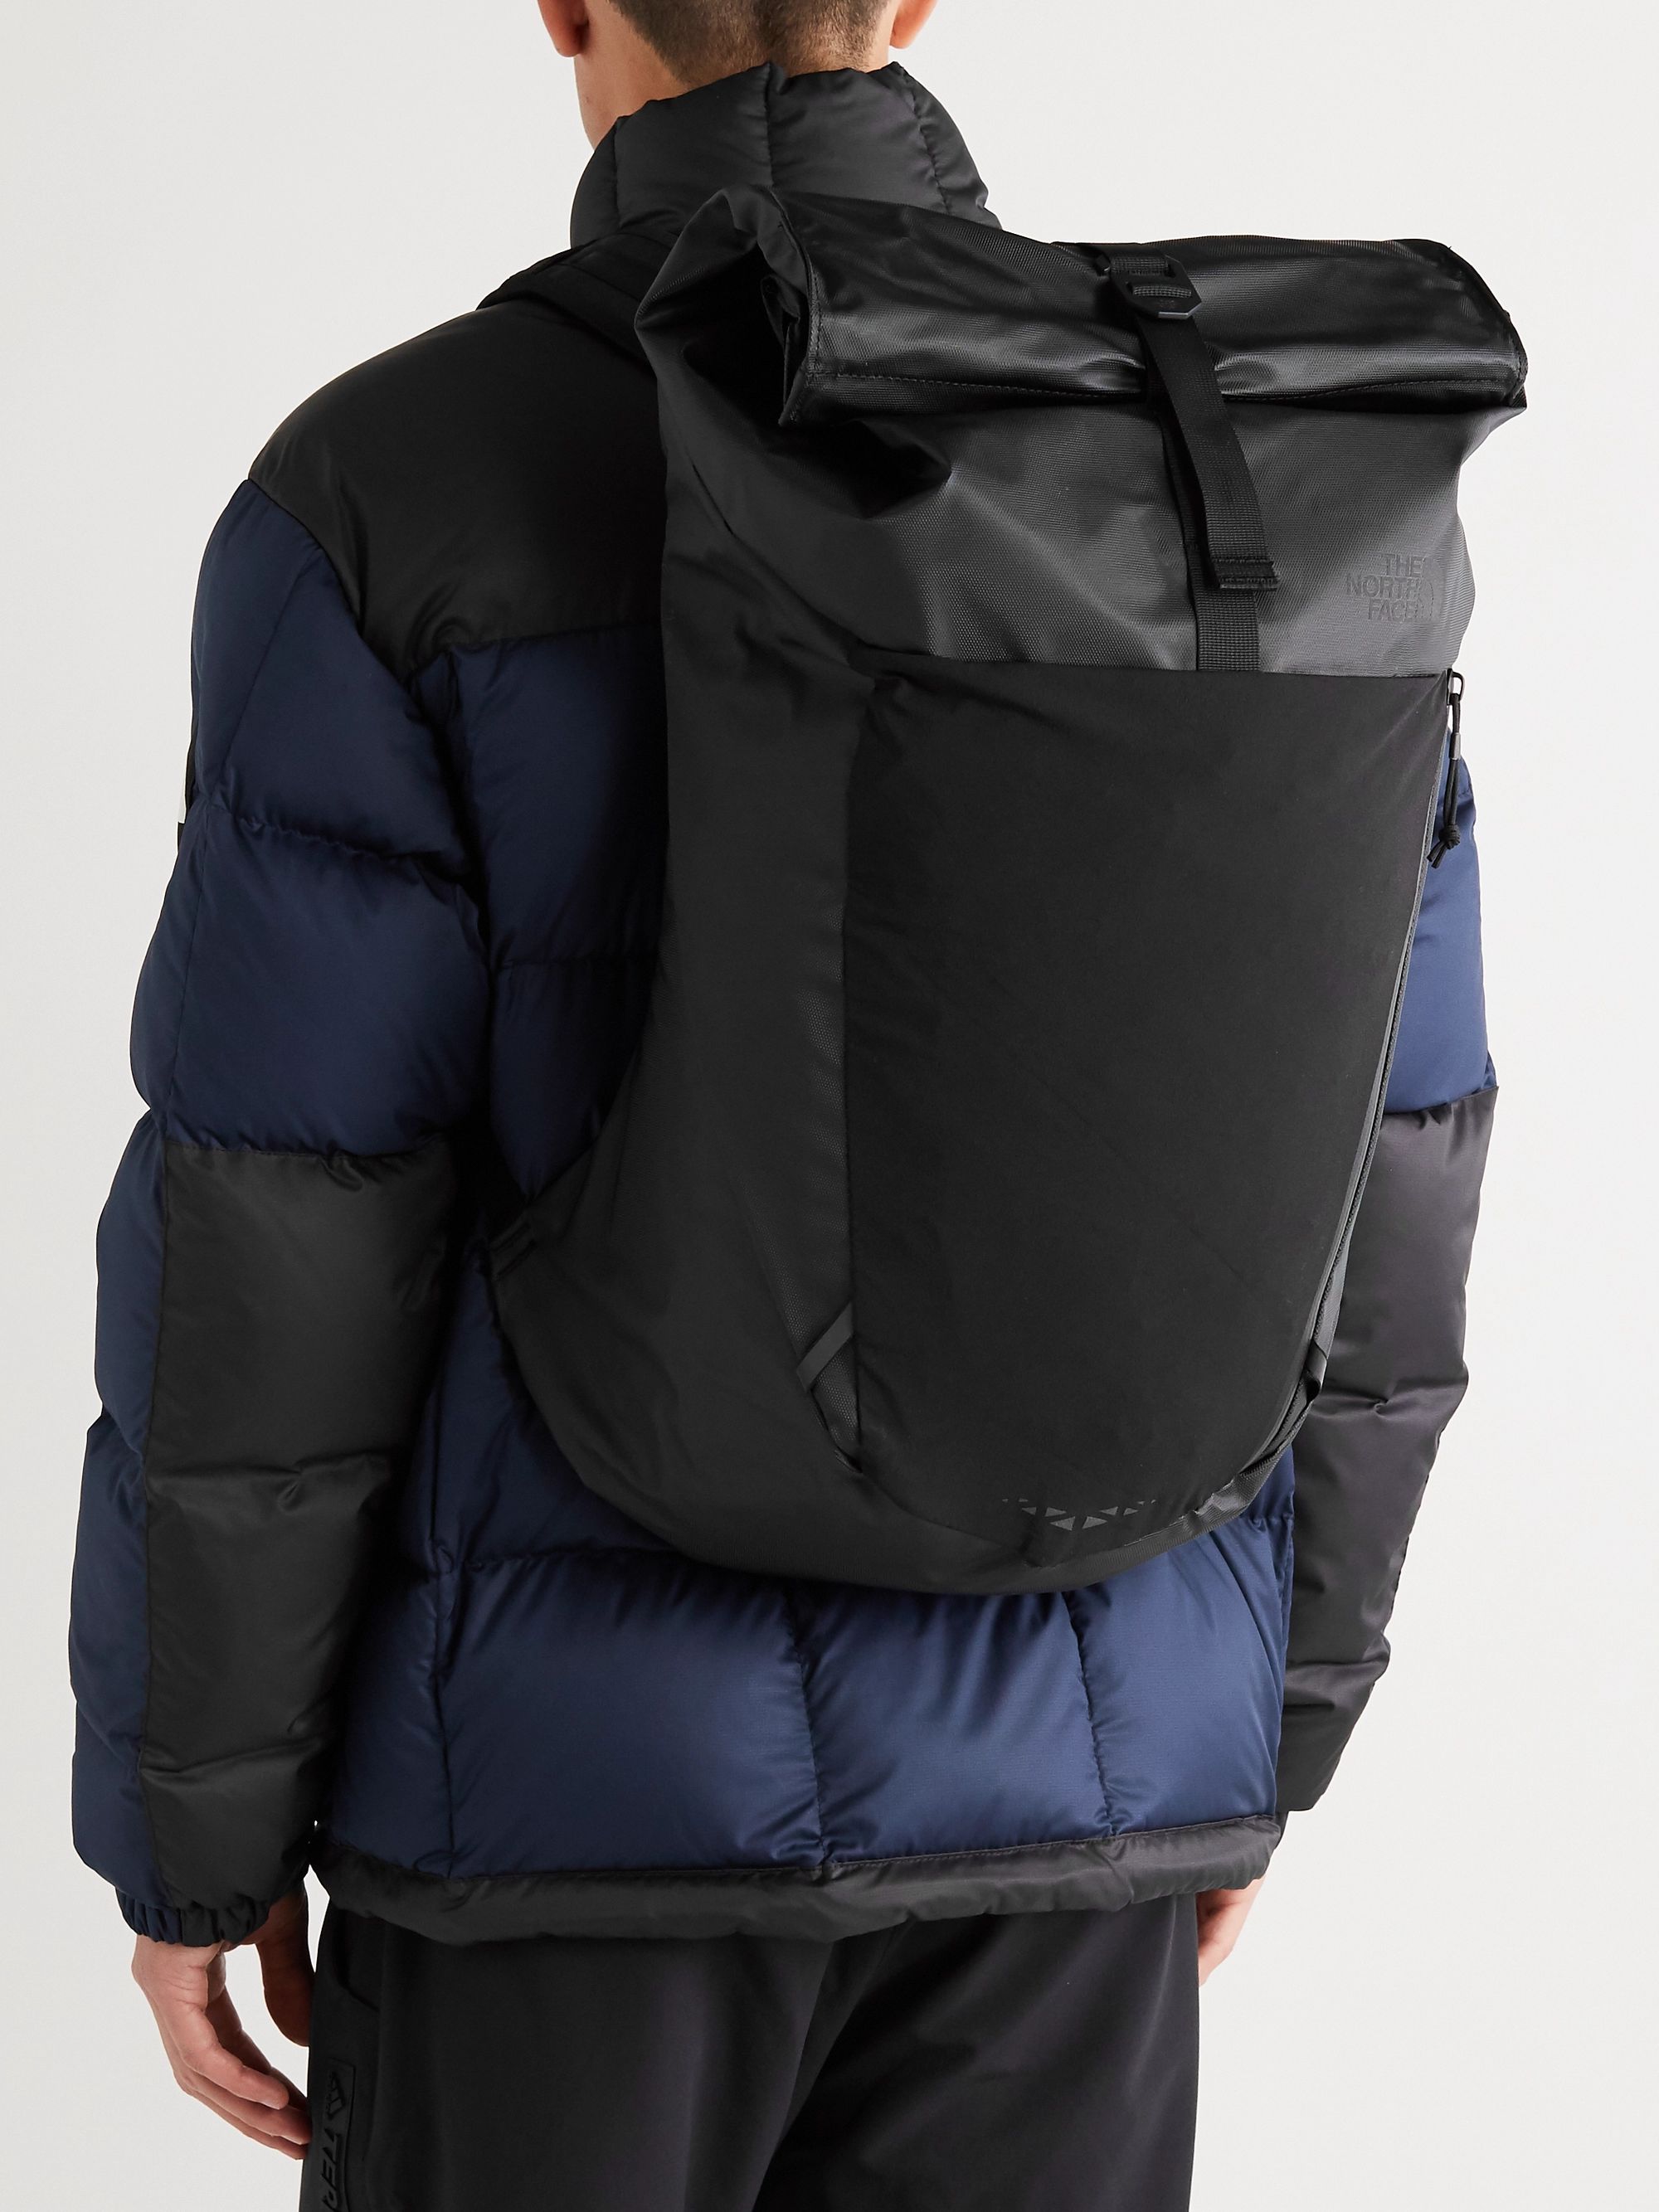 north face canvas backpack